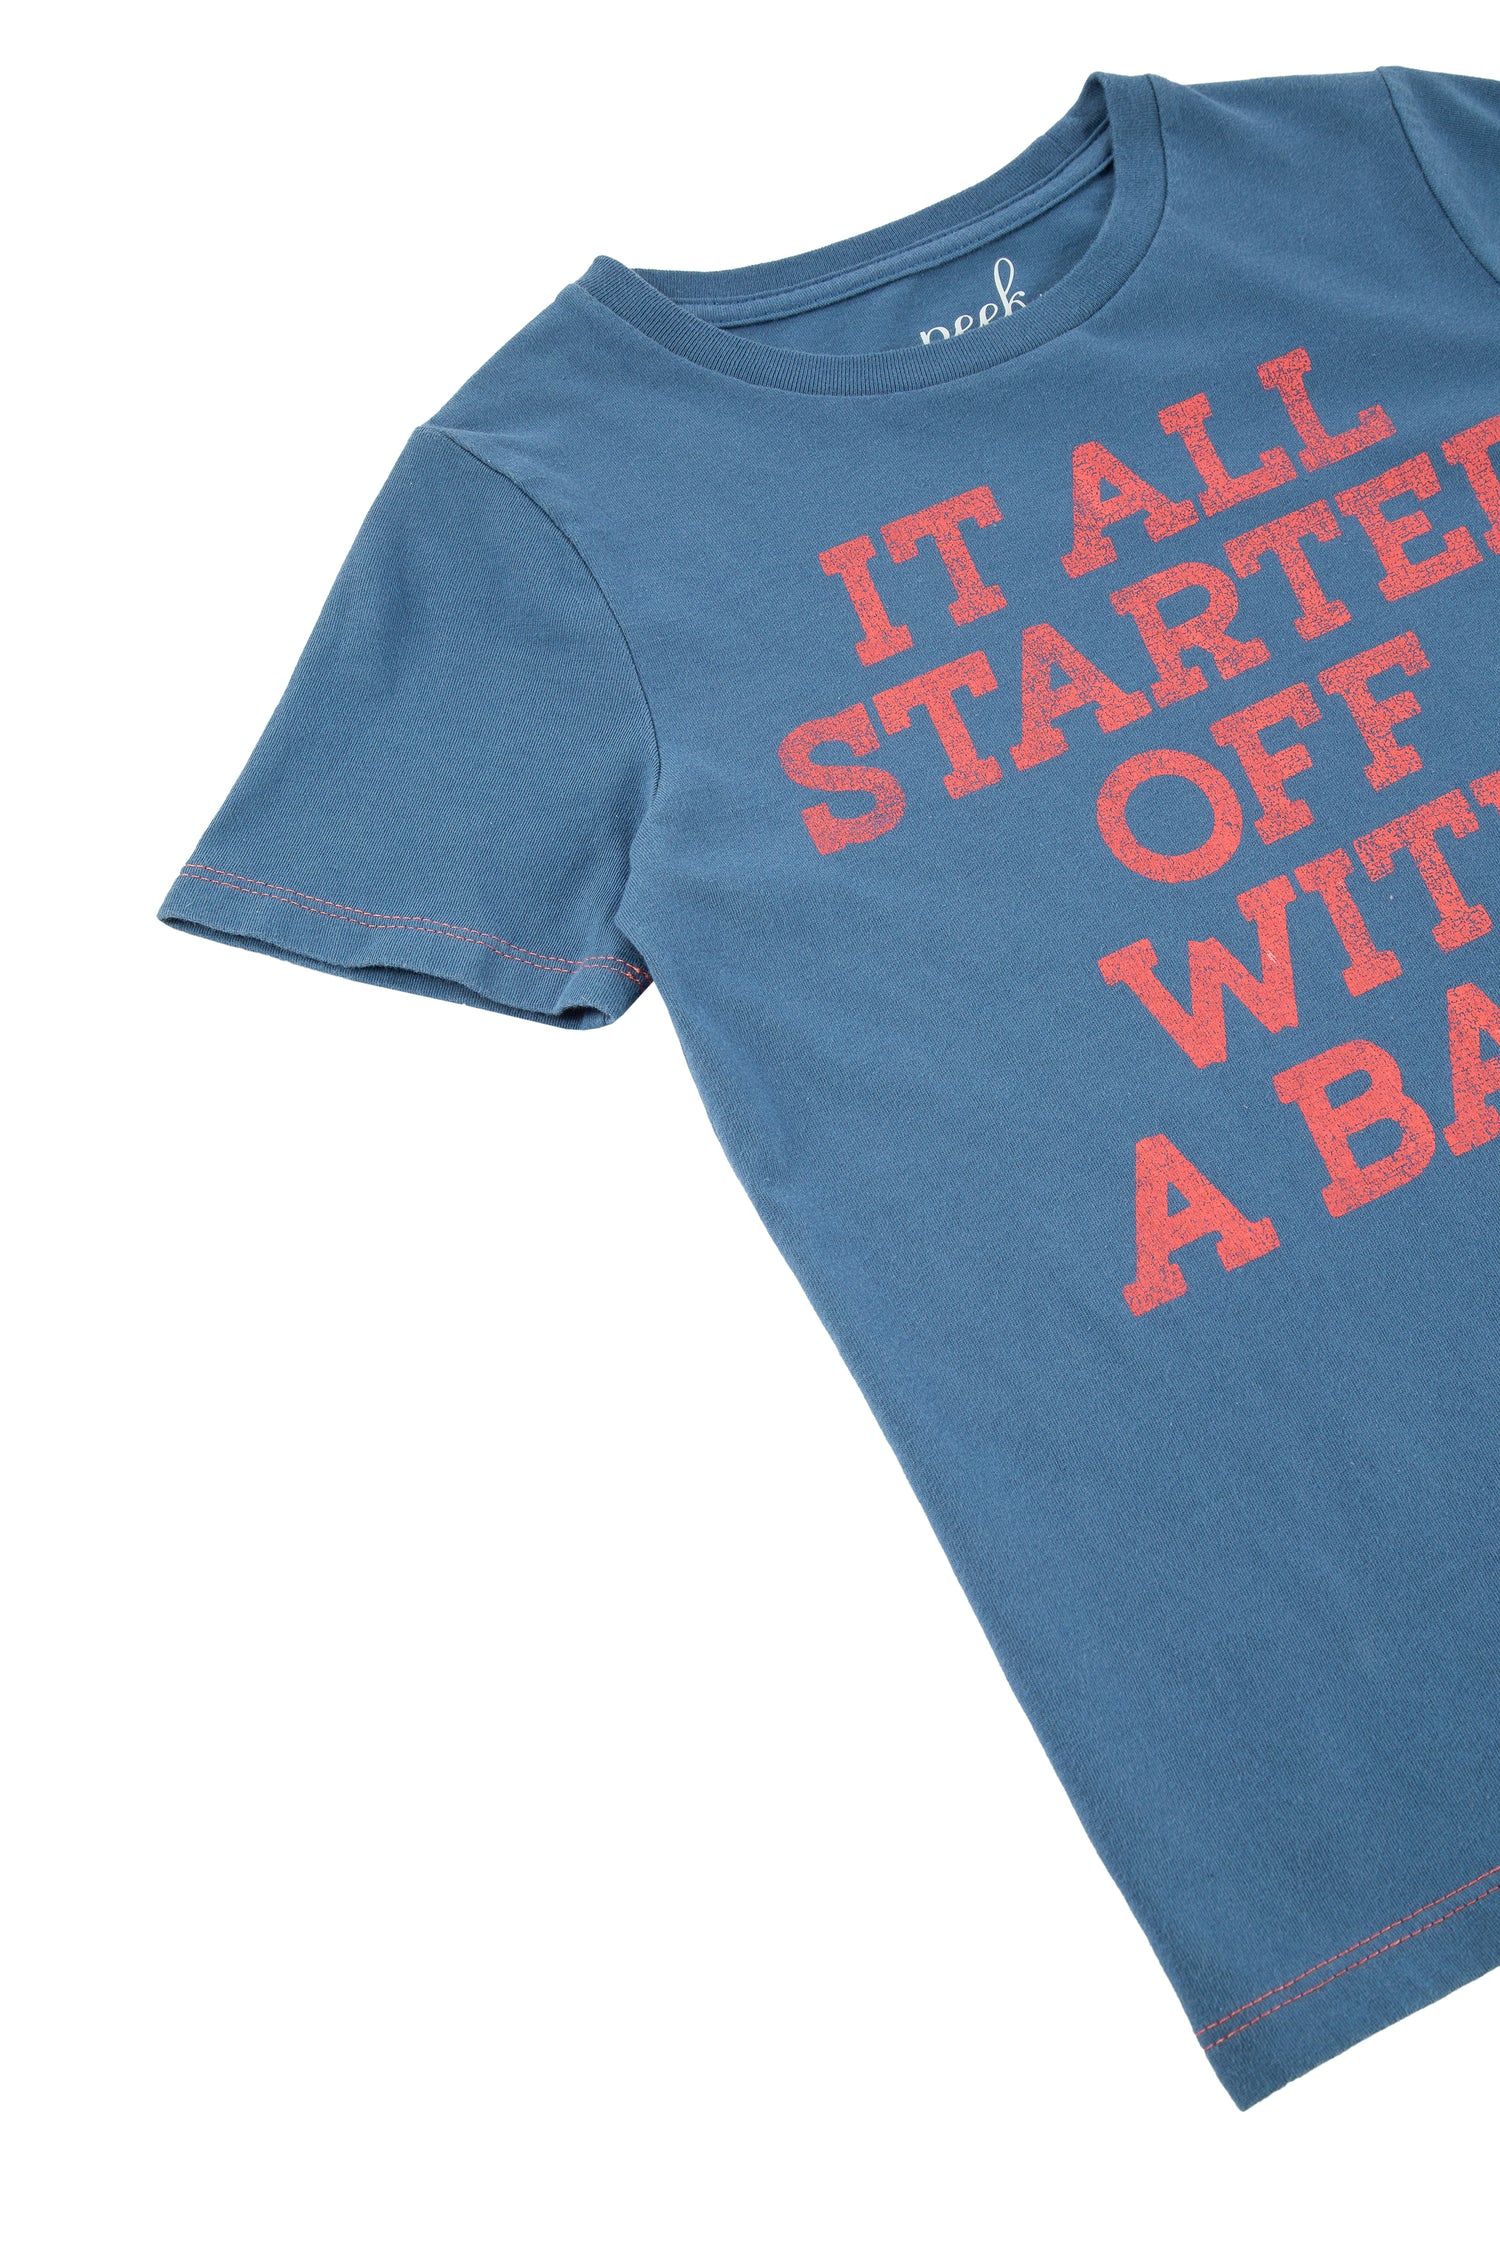 Close up of blue t-shirt with red "it all started off with a bang!" text